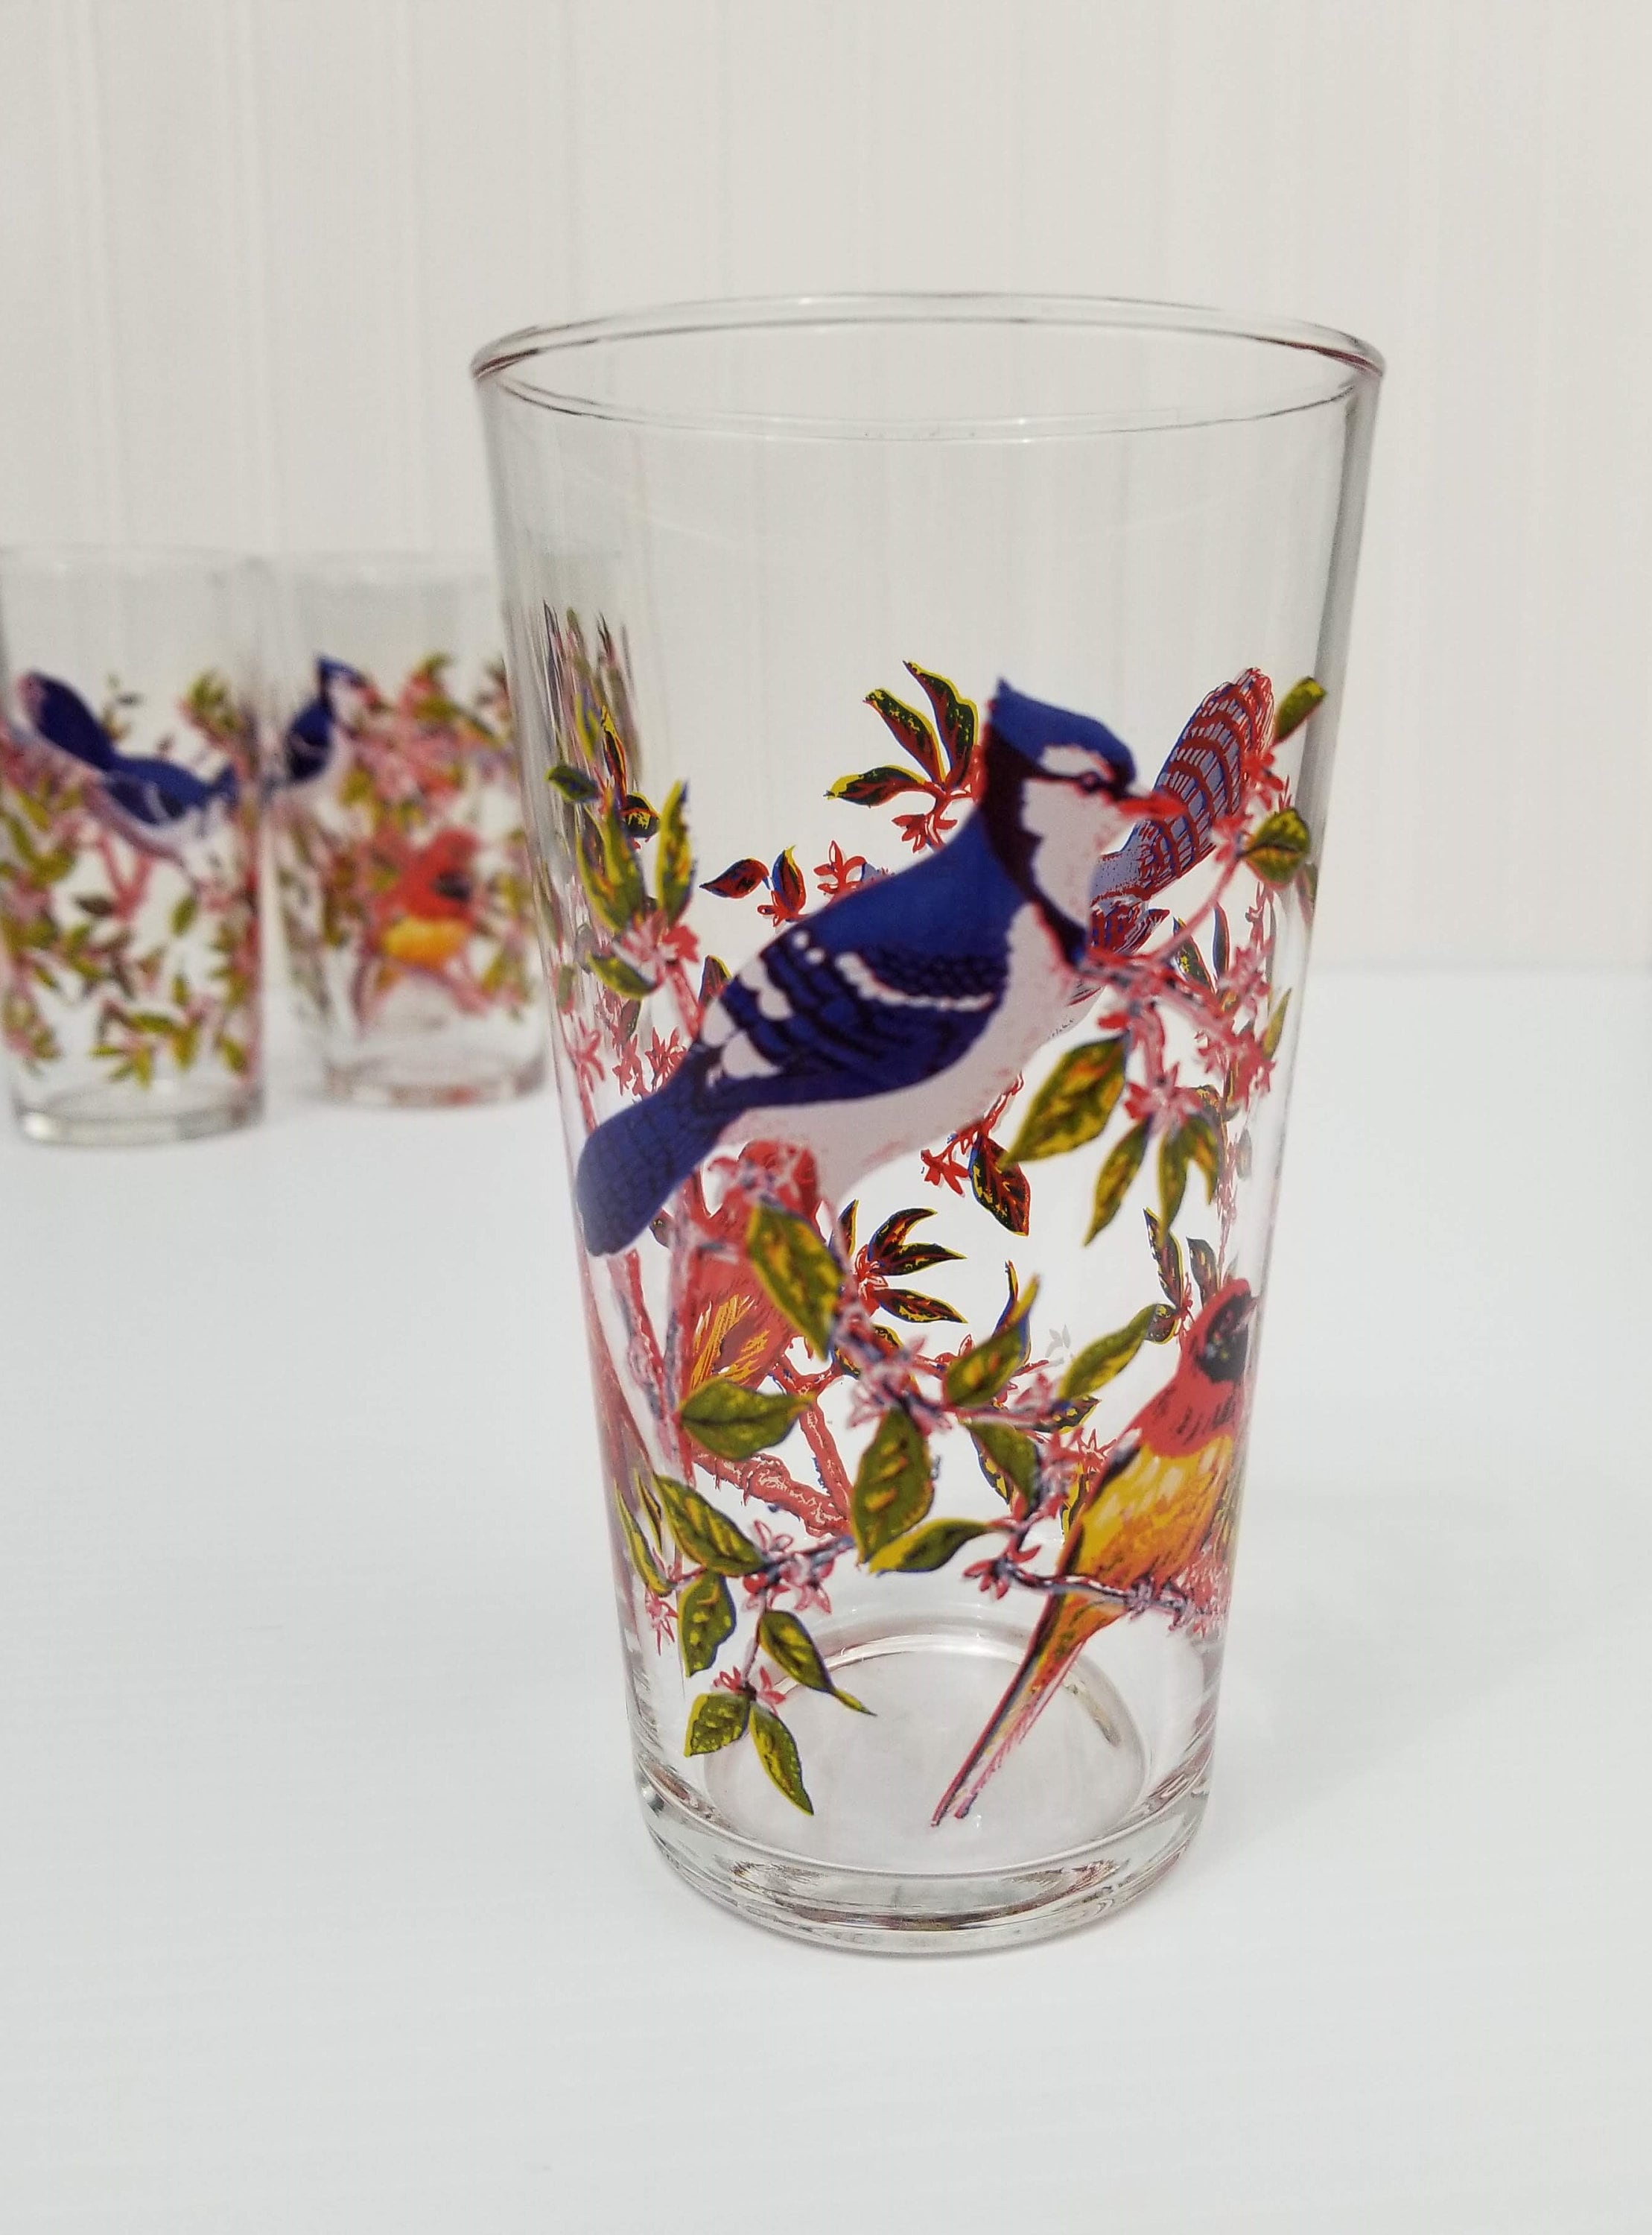 Vintage Drinking Glass with Blue Jays & Red/Yellow Birds, Set of 4 ...